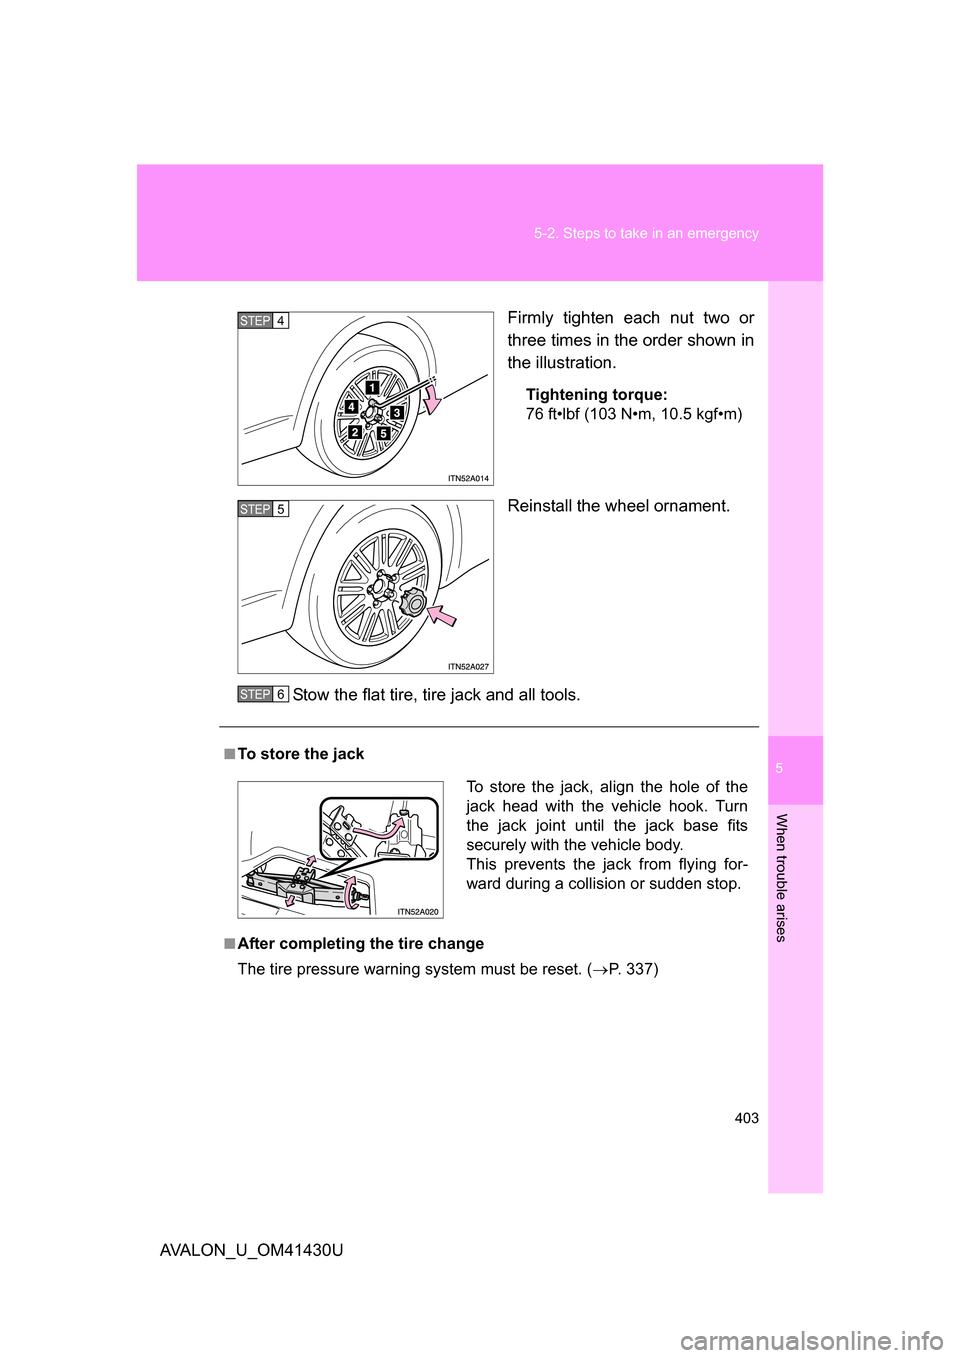 TOYOTA AVALON 2009 XX30 / 3.G Owners Manual 5
When trouble arises
403
5-2. Steps to take in an emergency
AVALON_U_OM41430U
Firmly tighten each nut two or
three times in the order shown in
the illustration.
Tightening torque:
76 ft•lbf (103 N�